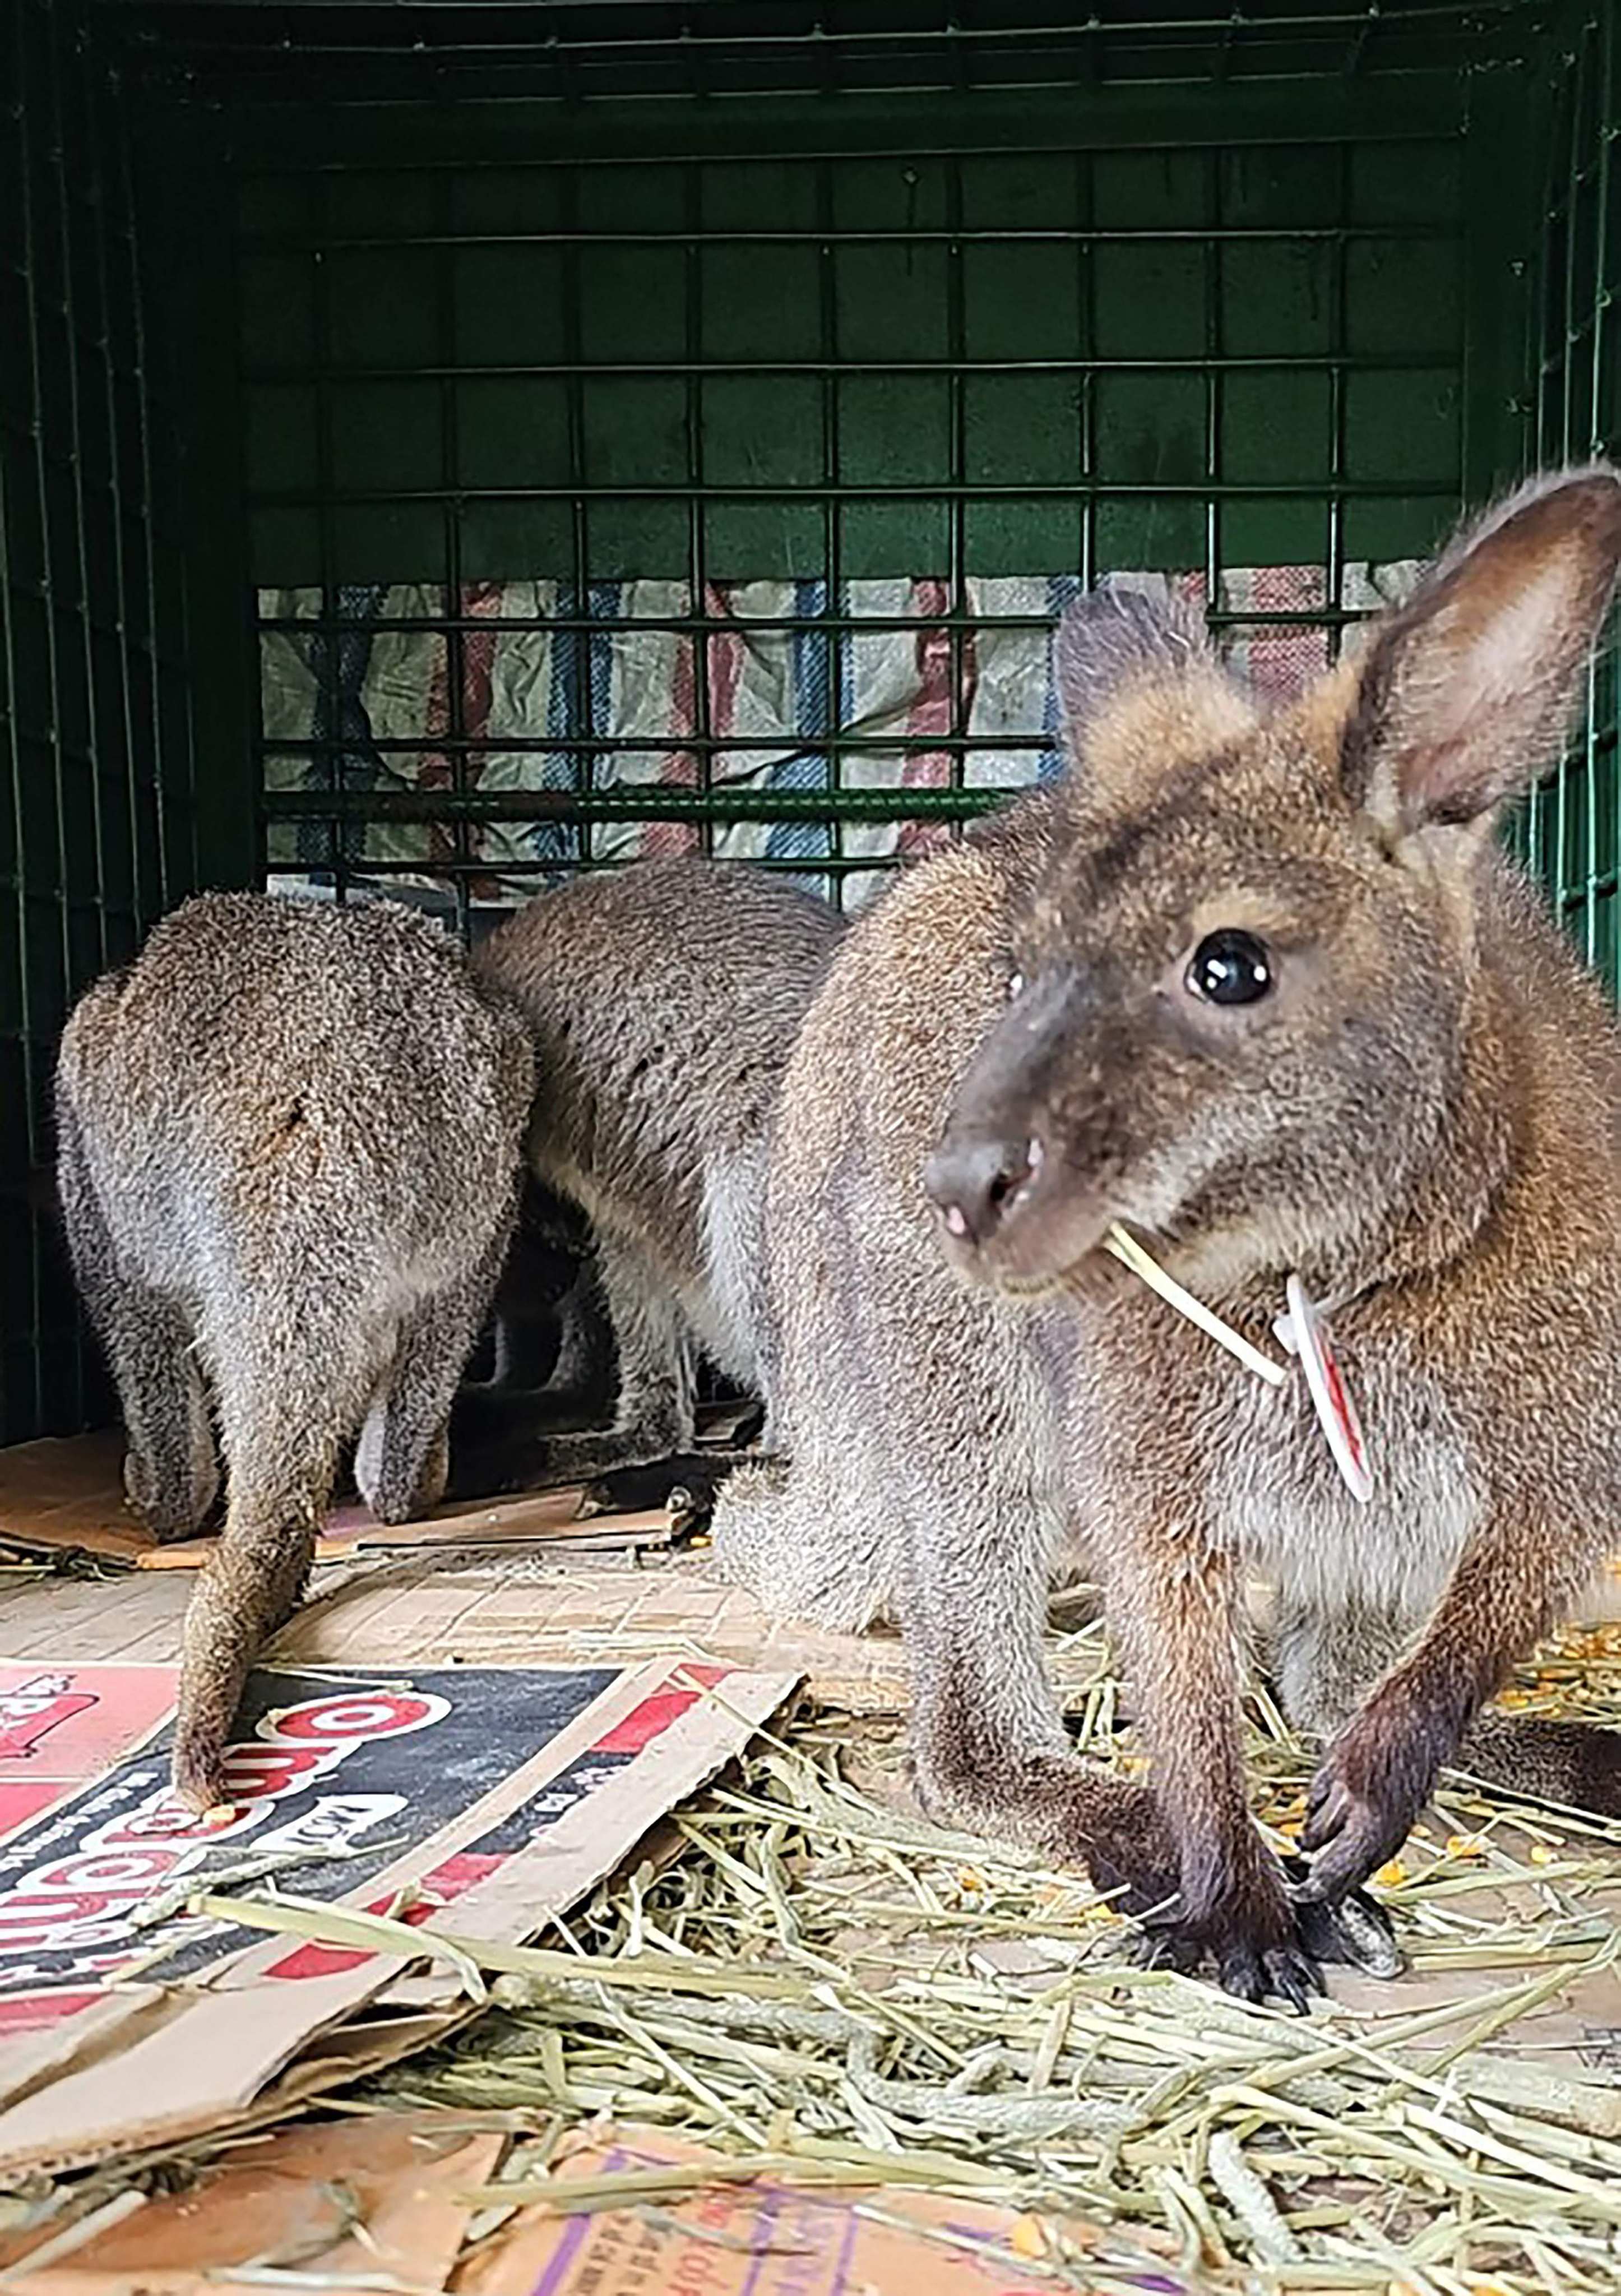 Wallabies at a rescue centre in the Lao Cai province in northern Vietnam. Four wallabies trafficked into Vietnam are on their way to a new home. Photo: AFP